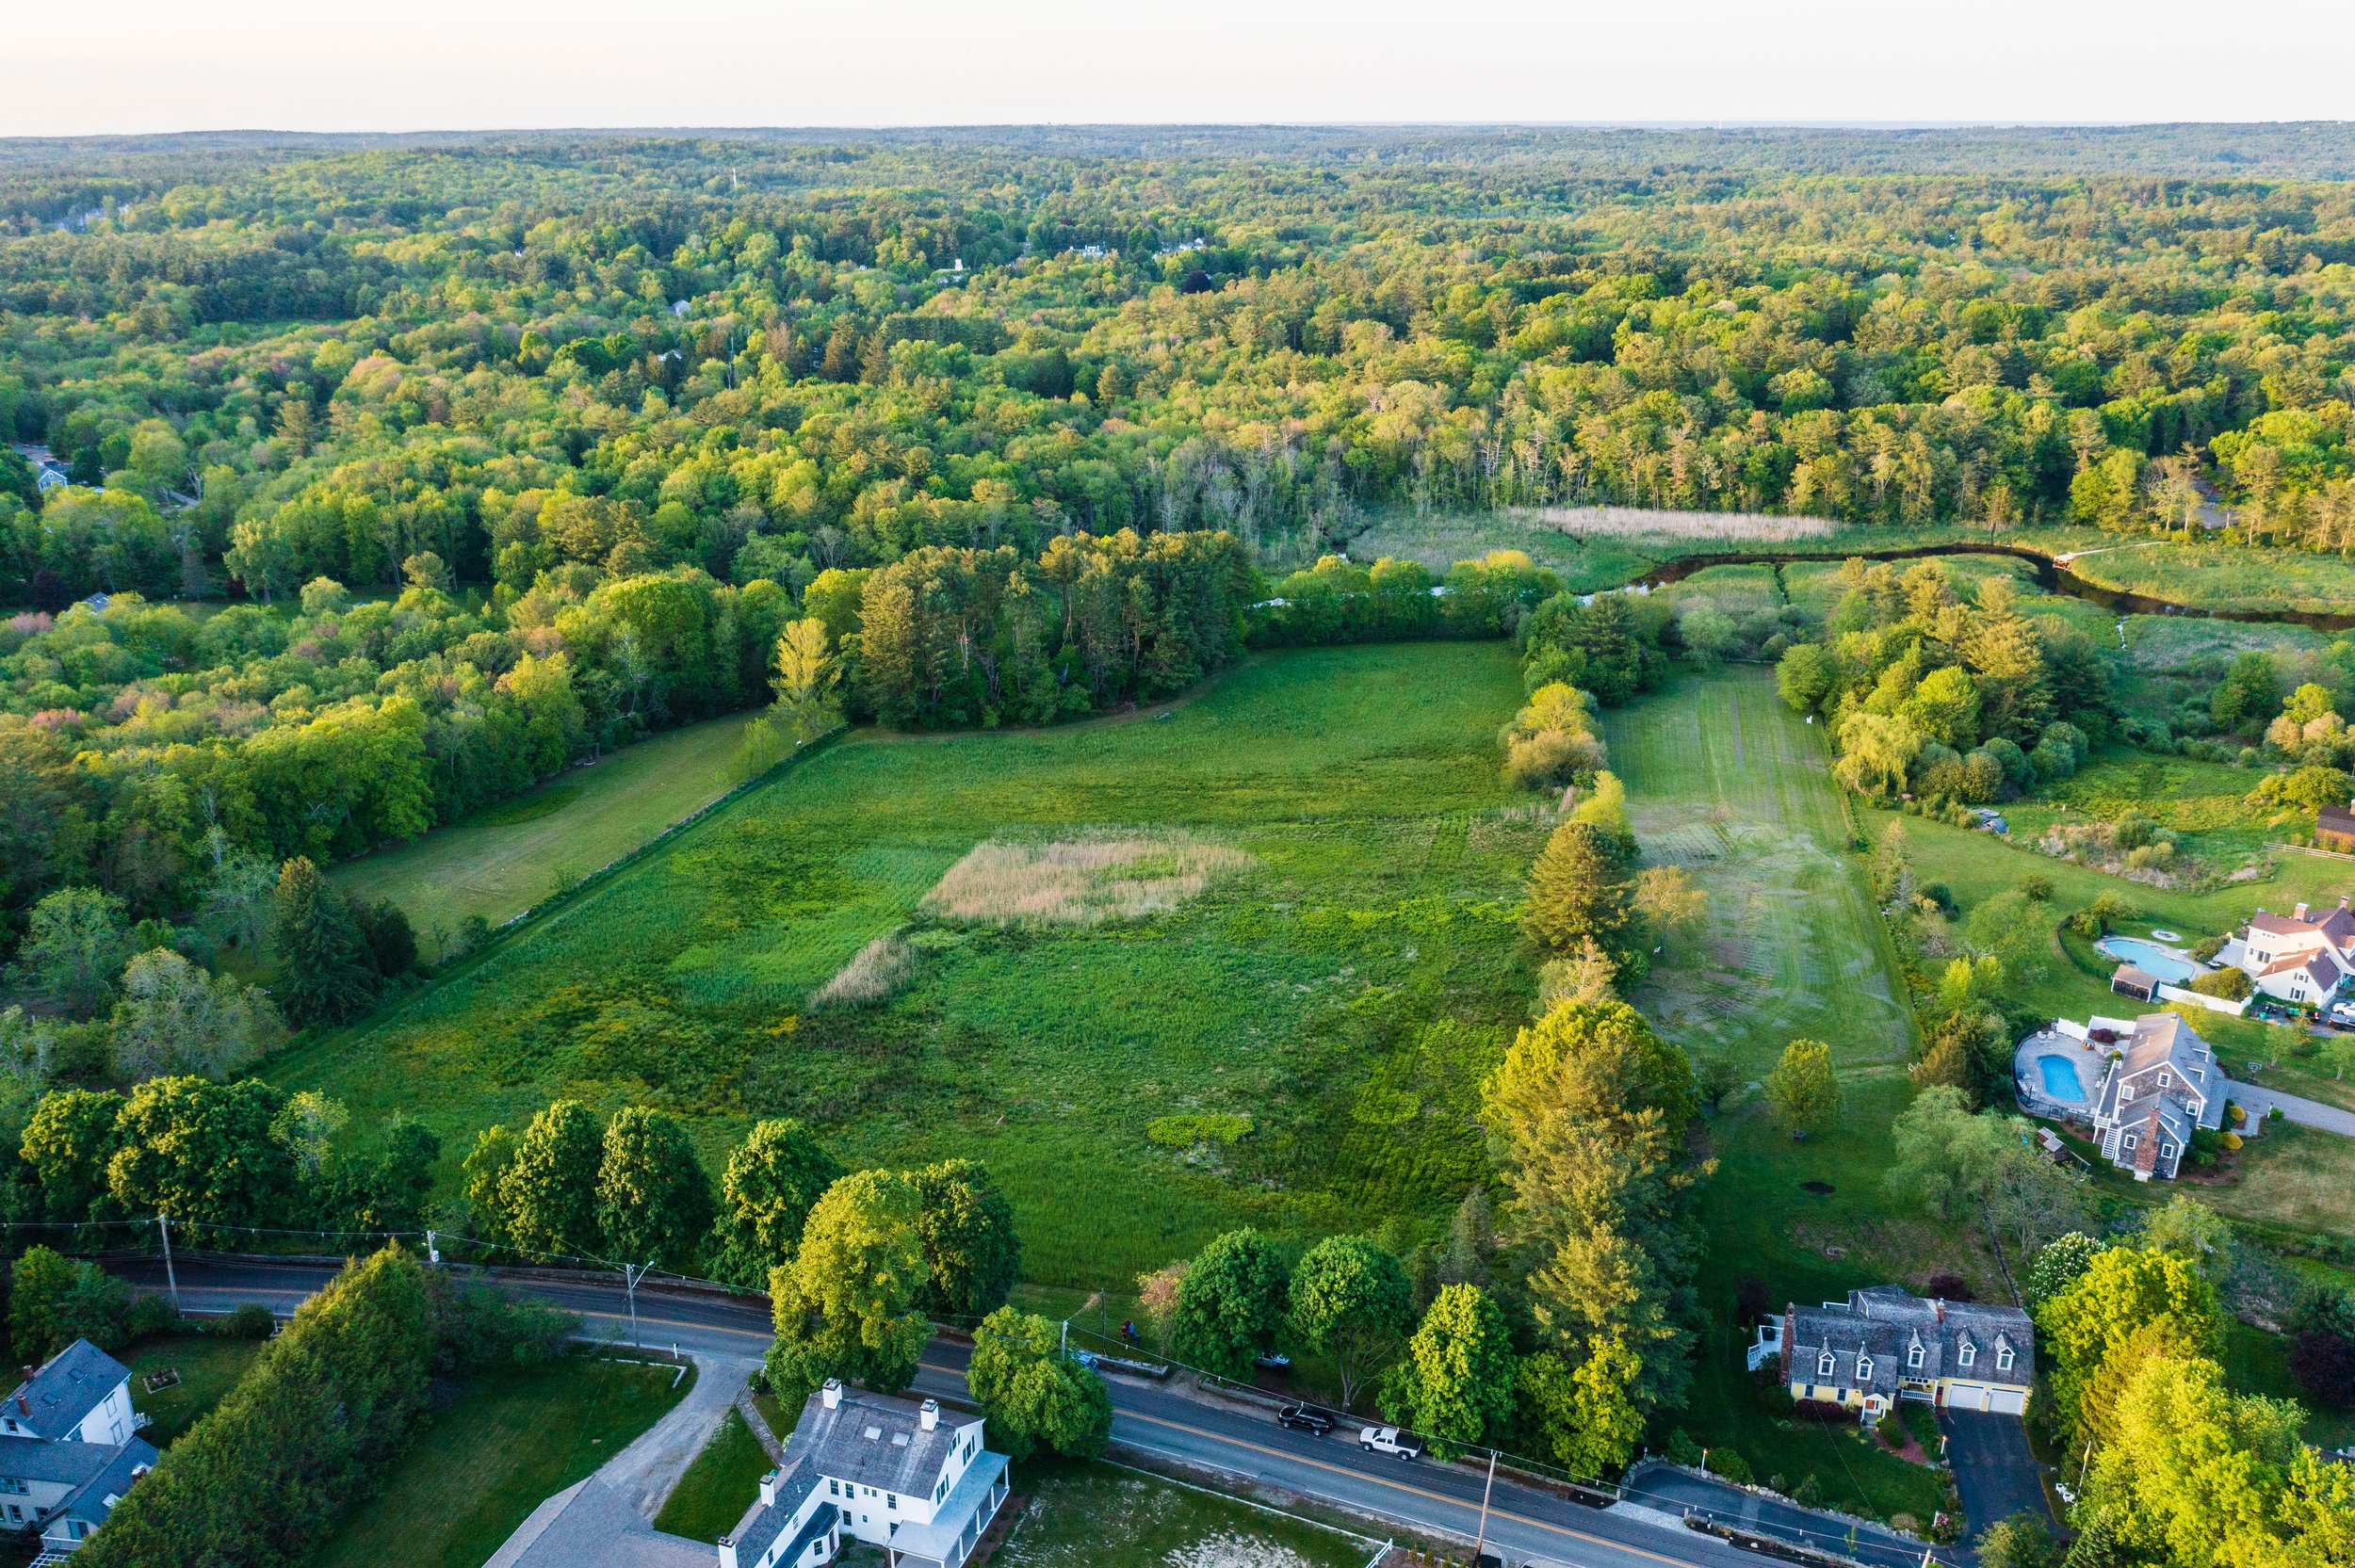  A drone's view of Sylvster Field and the Indian Head River in Hanover, Massachusetts. 